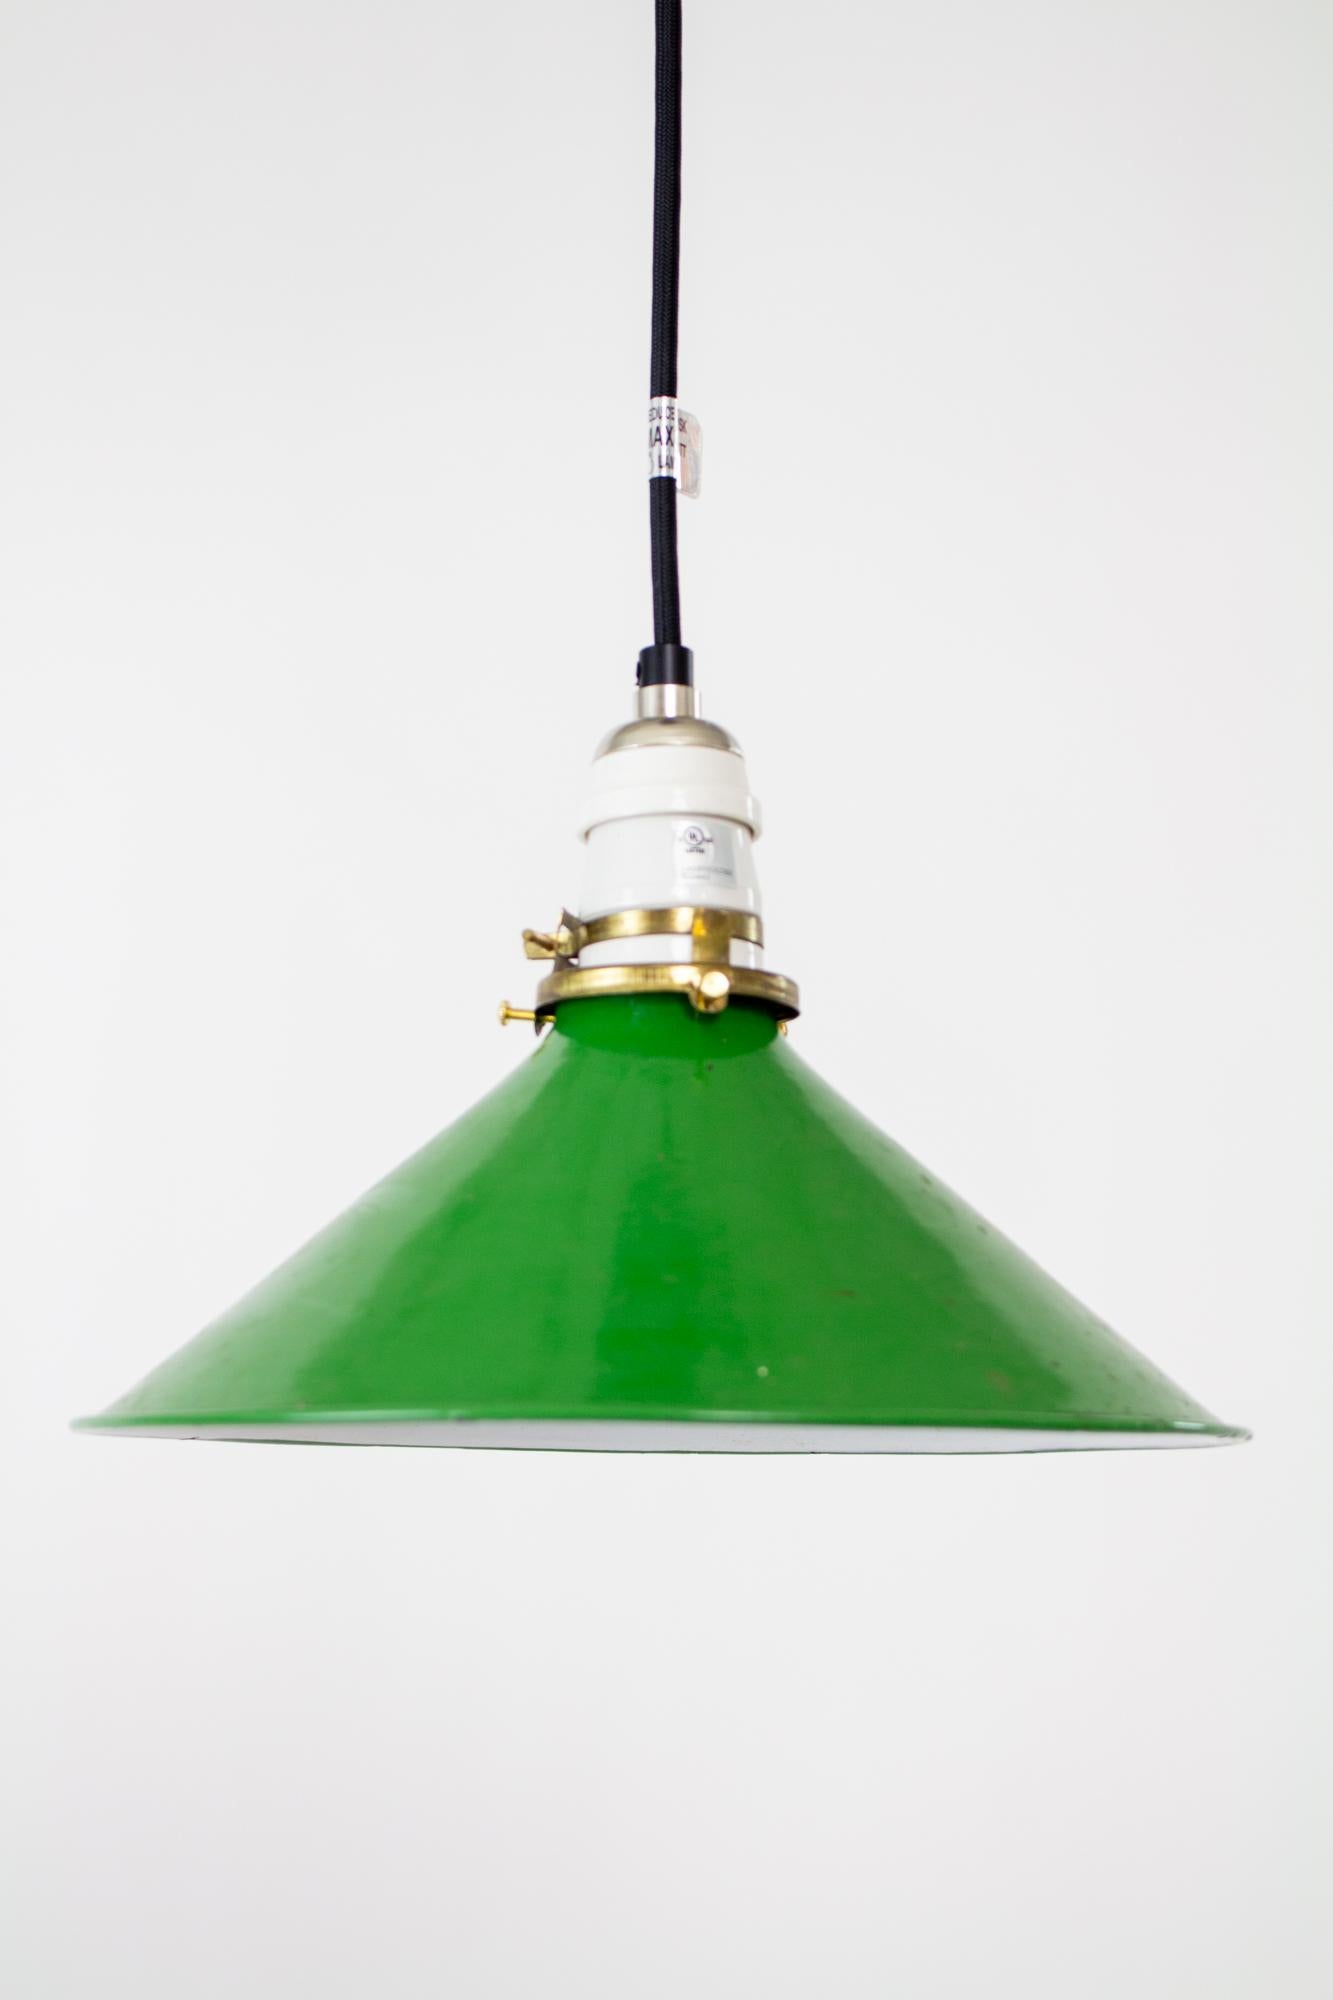 Vintage green enamel industrial pendant. Black cord and canopy, porcelain antique style socket, antique clamp fitter and green enamel conical shade. Shown with Edison style bulb as a style suggestion, bulb is not included. Fixture is adjustable from